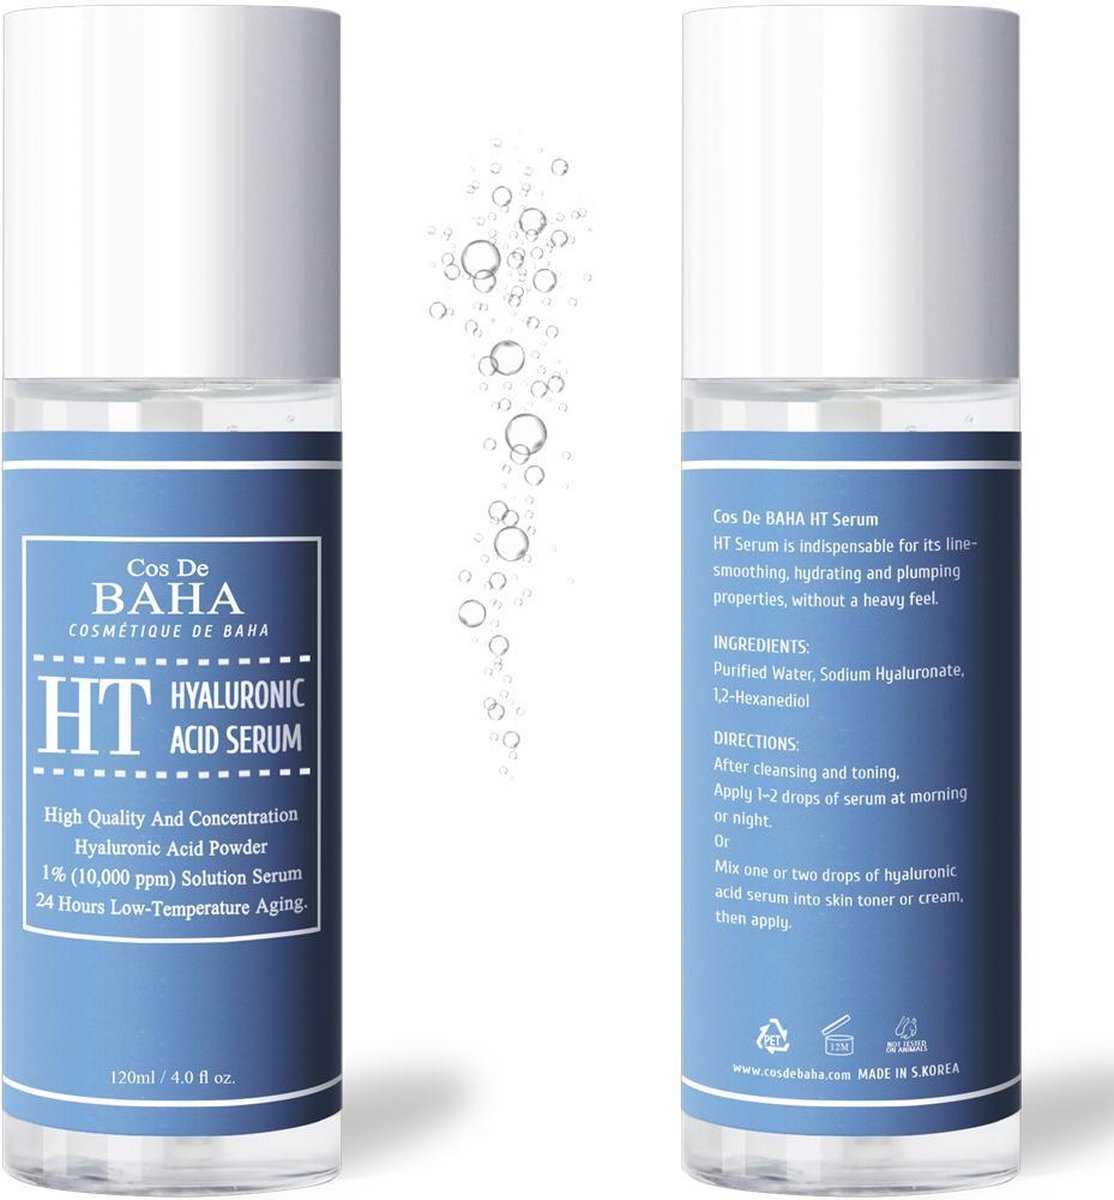 Cos de BAHA 120ml Large Hyaluronic Acid Pure Concentrated 1% Powder for Face 10,000ppm Serum - Anti Age - Filler Wrinkle + Intense Hydration & Visibly Plumped Skin - Hyaluronzuur - All Skin Types (also Sensitive Skin) and Collagen Booster